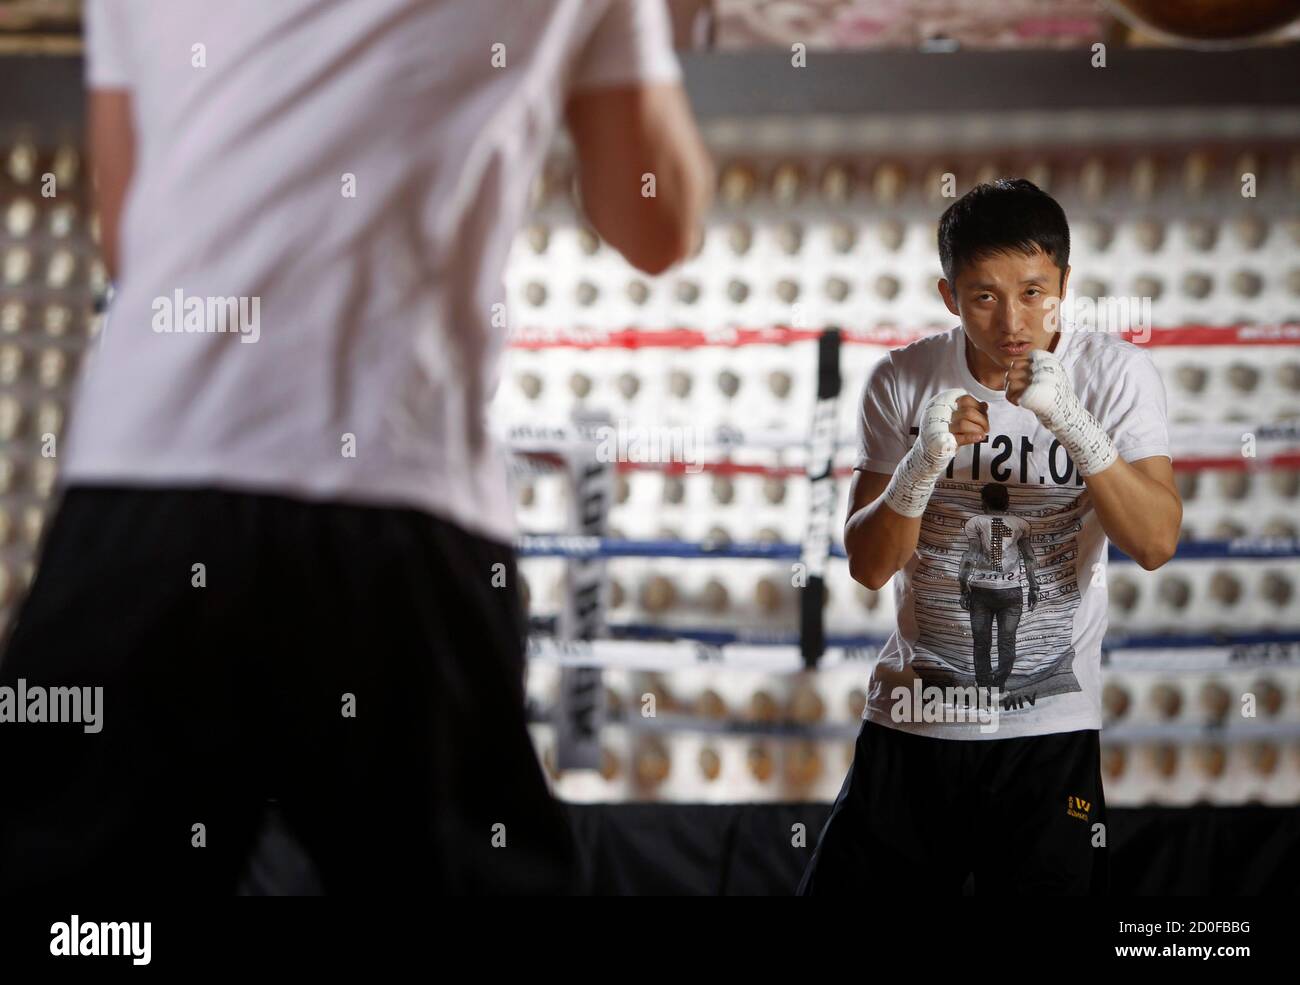 Chinese light flyweight boxer Zou Shiming shadowboxes in a training facility at the Venetian Casino Resort in Las Vegas, Nevada February 8, 2013. Zou, a two-time Olympic gold medalist and three-time world amateur champion, will make his professional debut April 6 at the Venetian Macao Resort in Macau. REUTERS/Steve Marcus (UNITED STATES - Tags: SPORT BOXING) Stock Photo